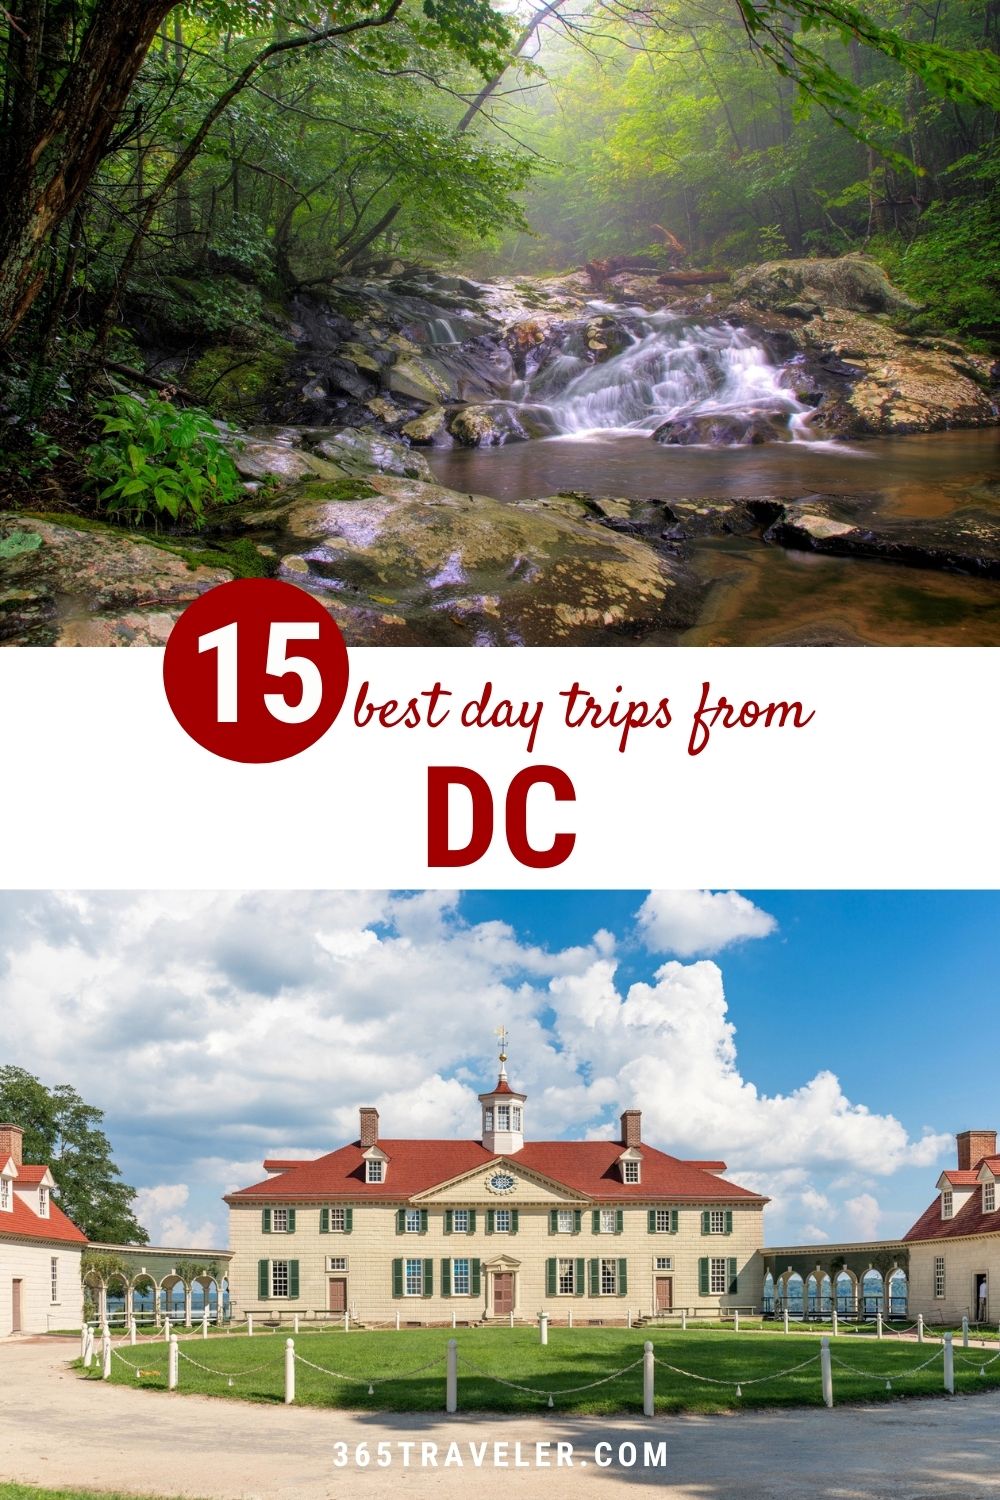 15 Fun Day Trips From DC You’ve Got To Experience